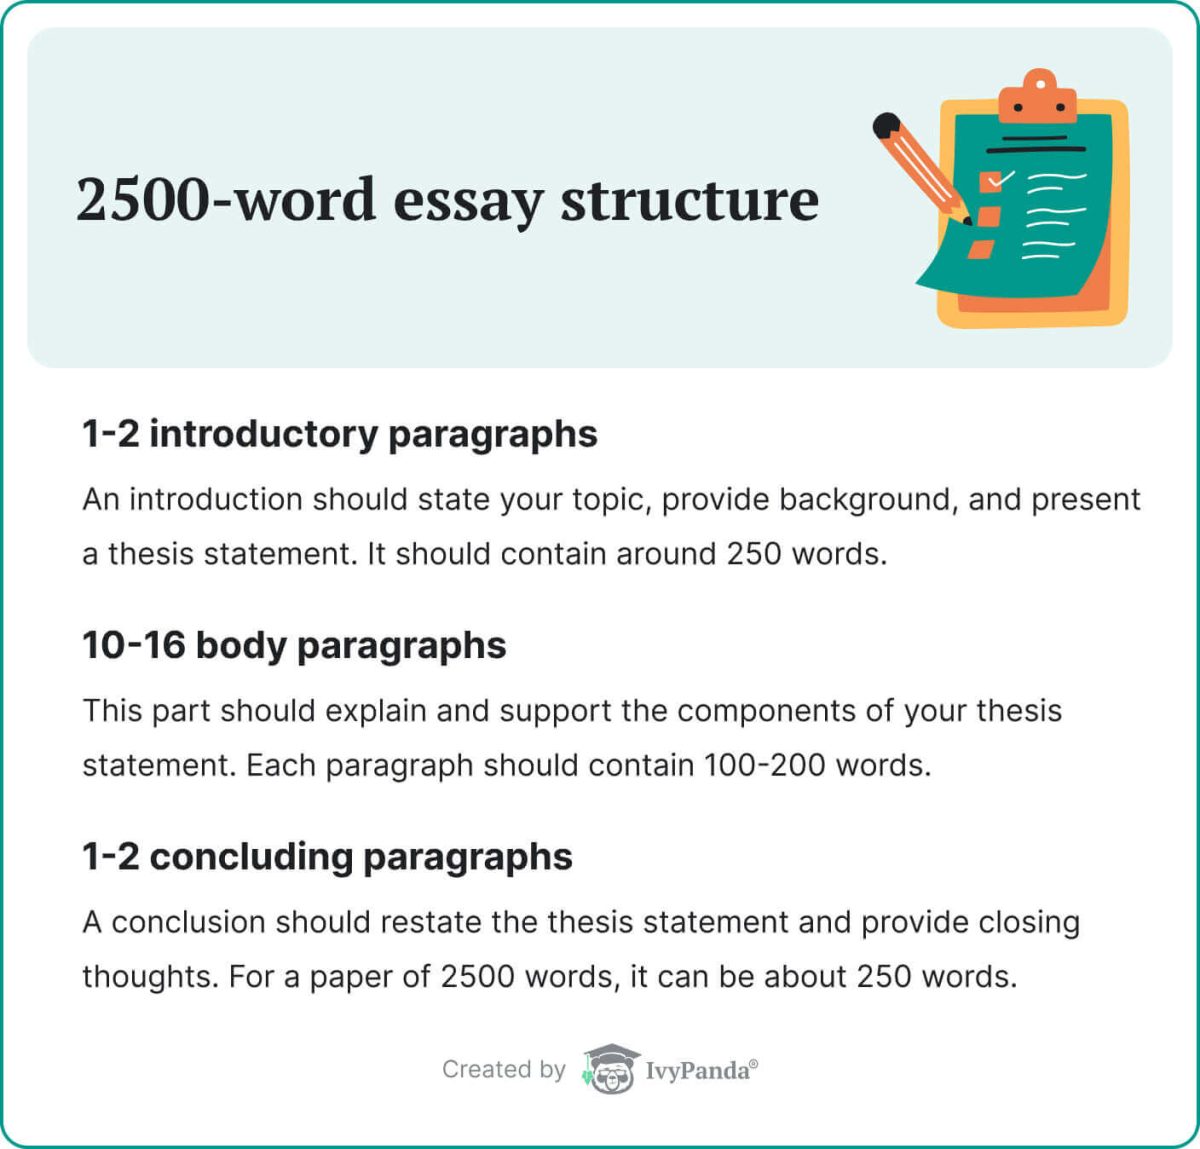 structure of 2500 word essay